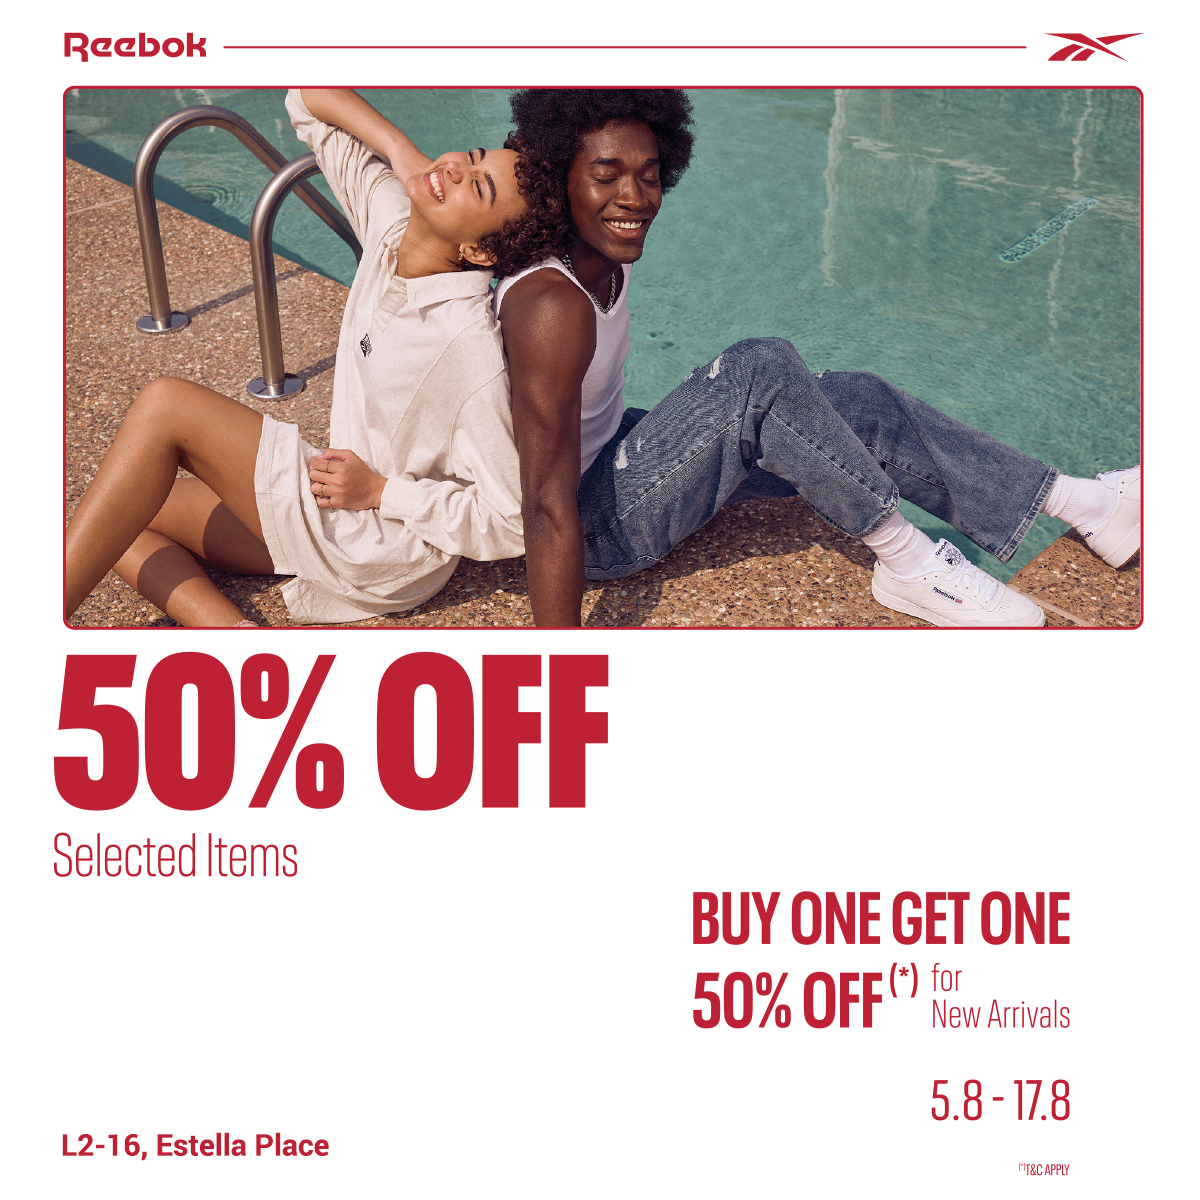 ENJOY 50% OFF FOR HOT ITEMS